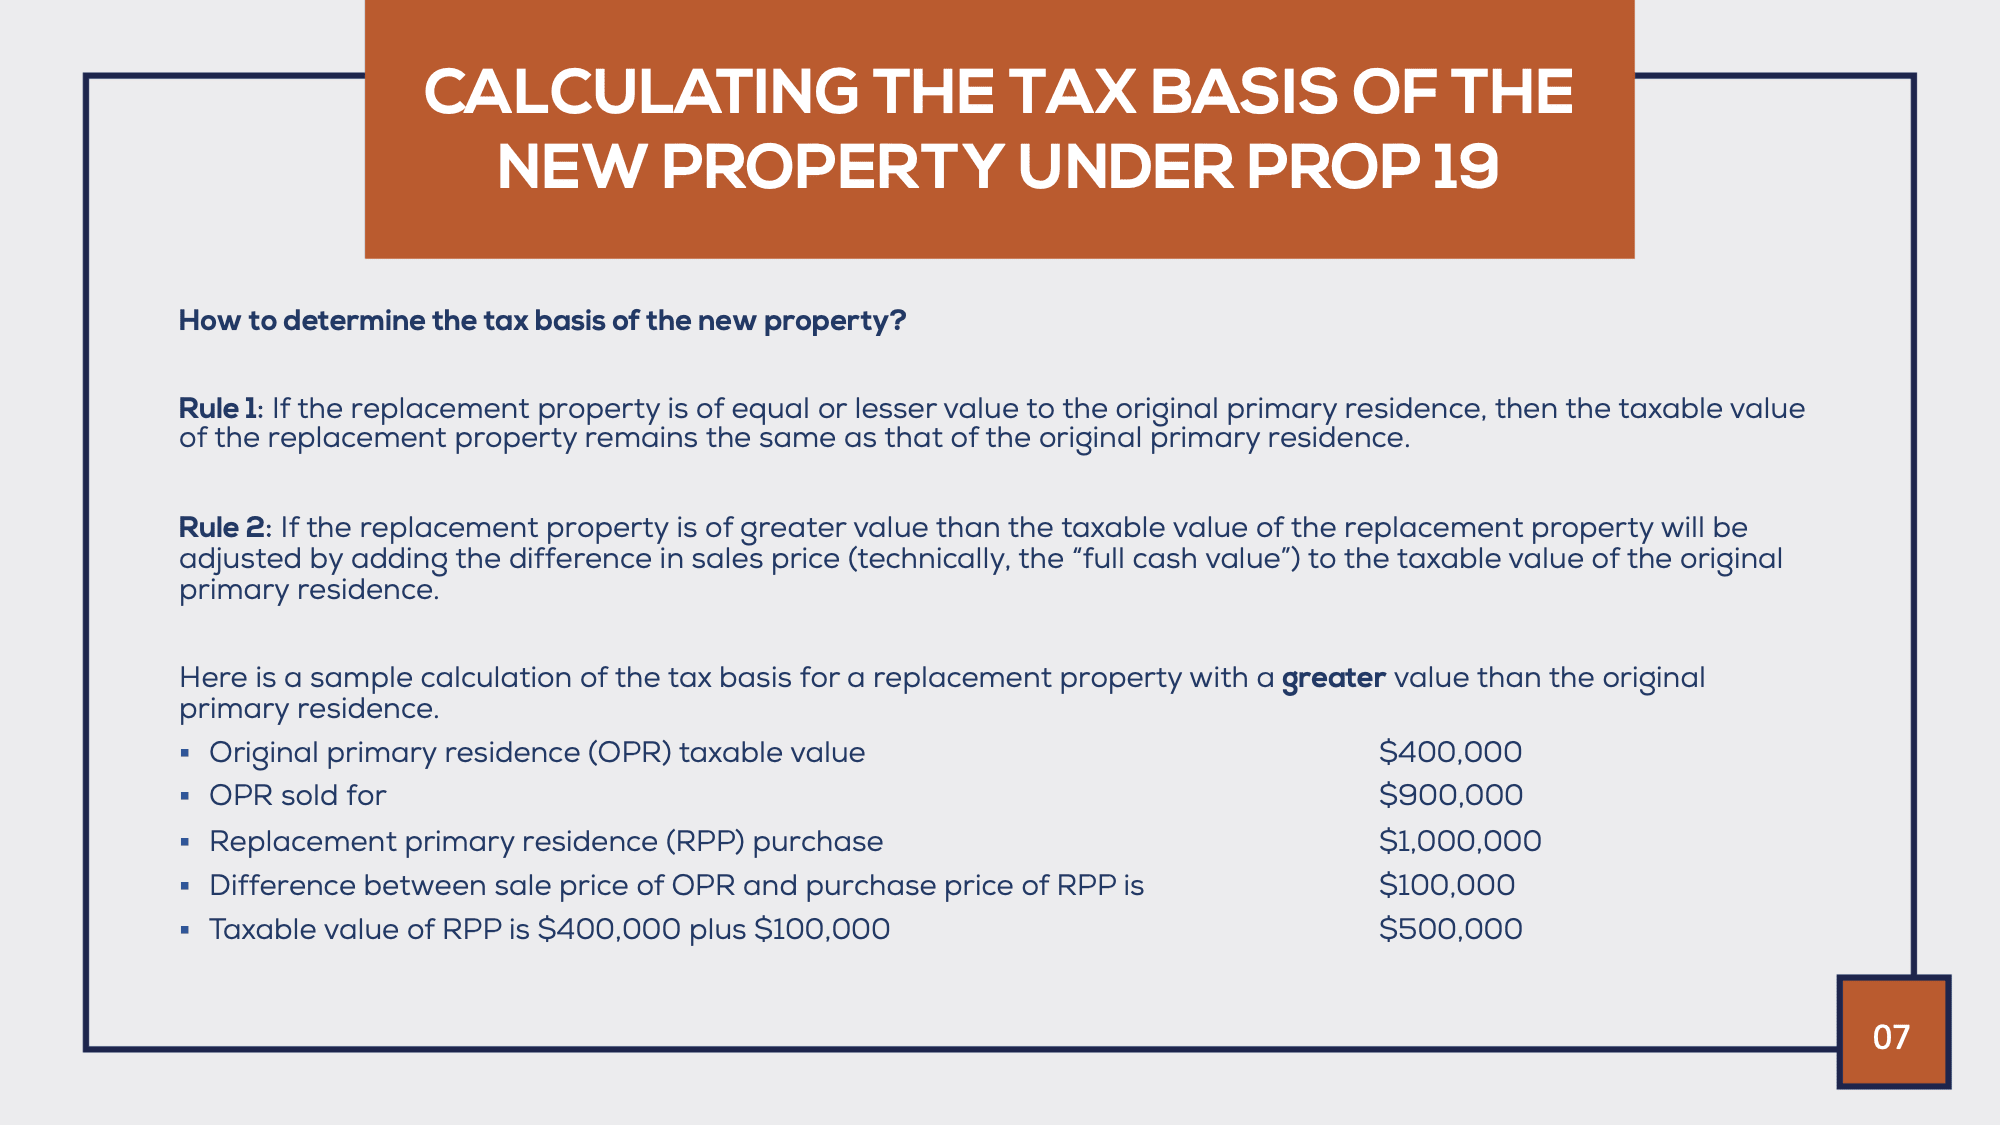 Calculating tax basis of a new property for Prop 19